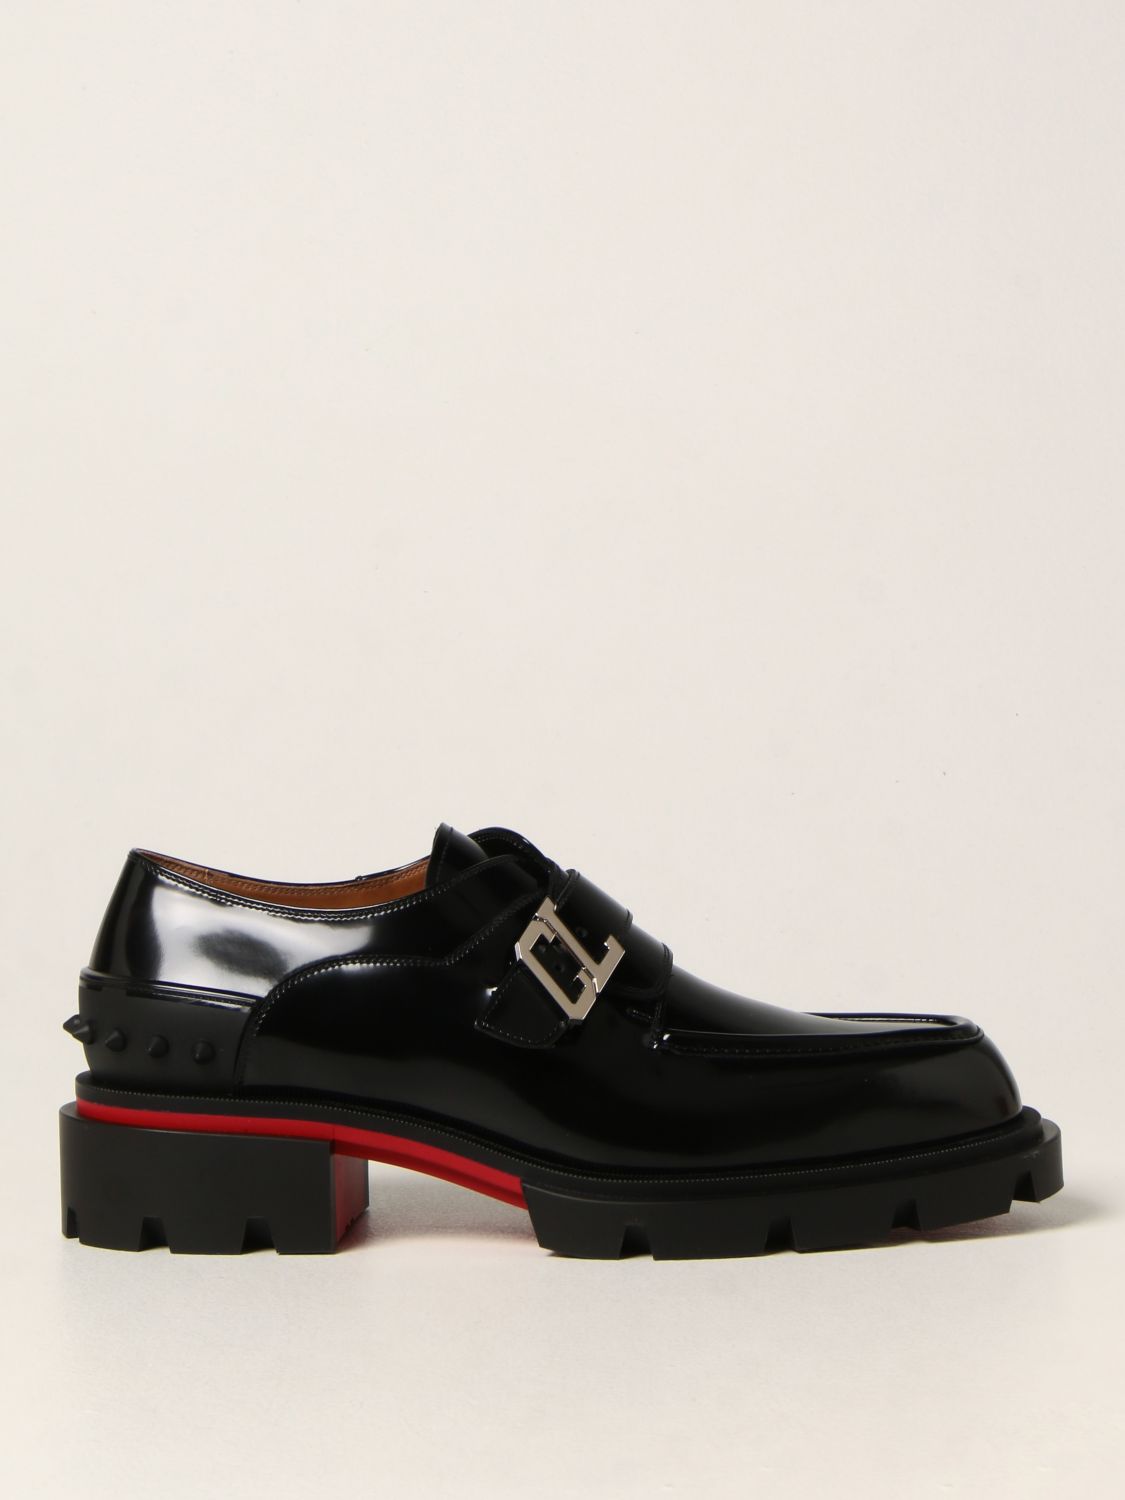 CHRISTIAN LOUBOUTIN: Chaussures homme | Mocassins Christian Louboutin Homme  Noir | Mocassins Christian Louboutin 1220439 GIGLIO.COM